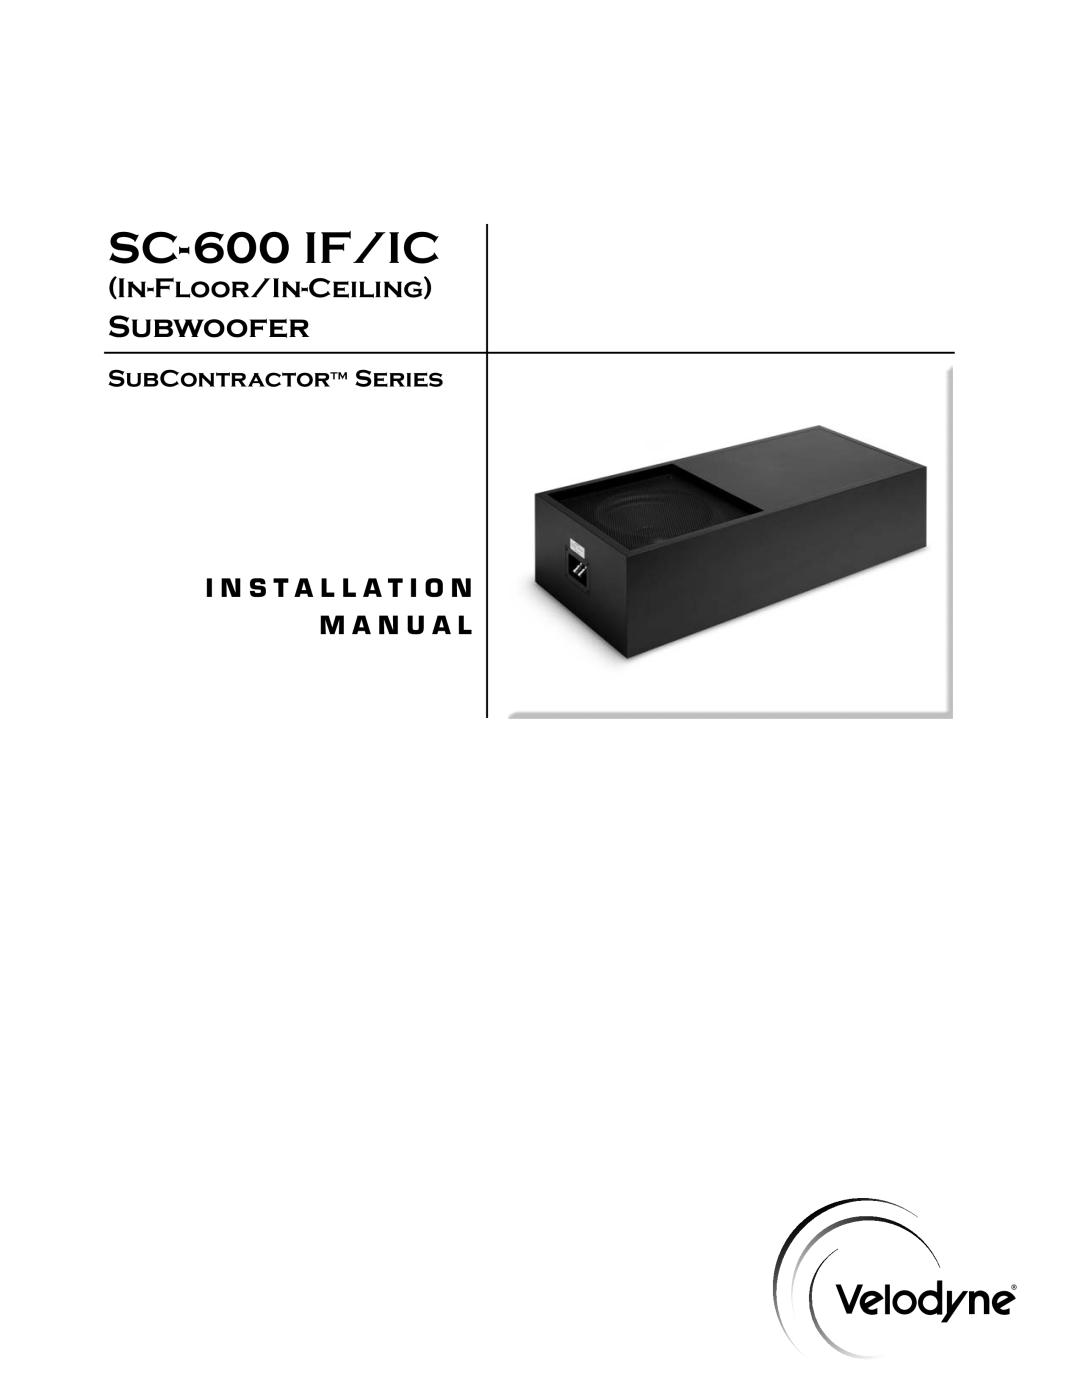 Velodyne Acoustics SC-600 IF/IC installation manual SC-600IF/IC, In-Floor/In-CeilingSubwoofer, SubContractorTM Series 